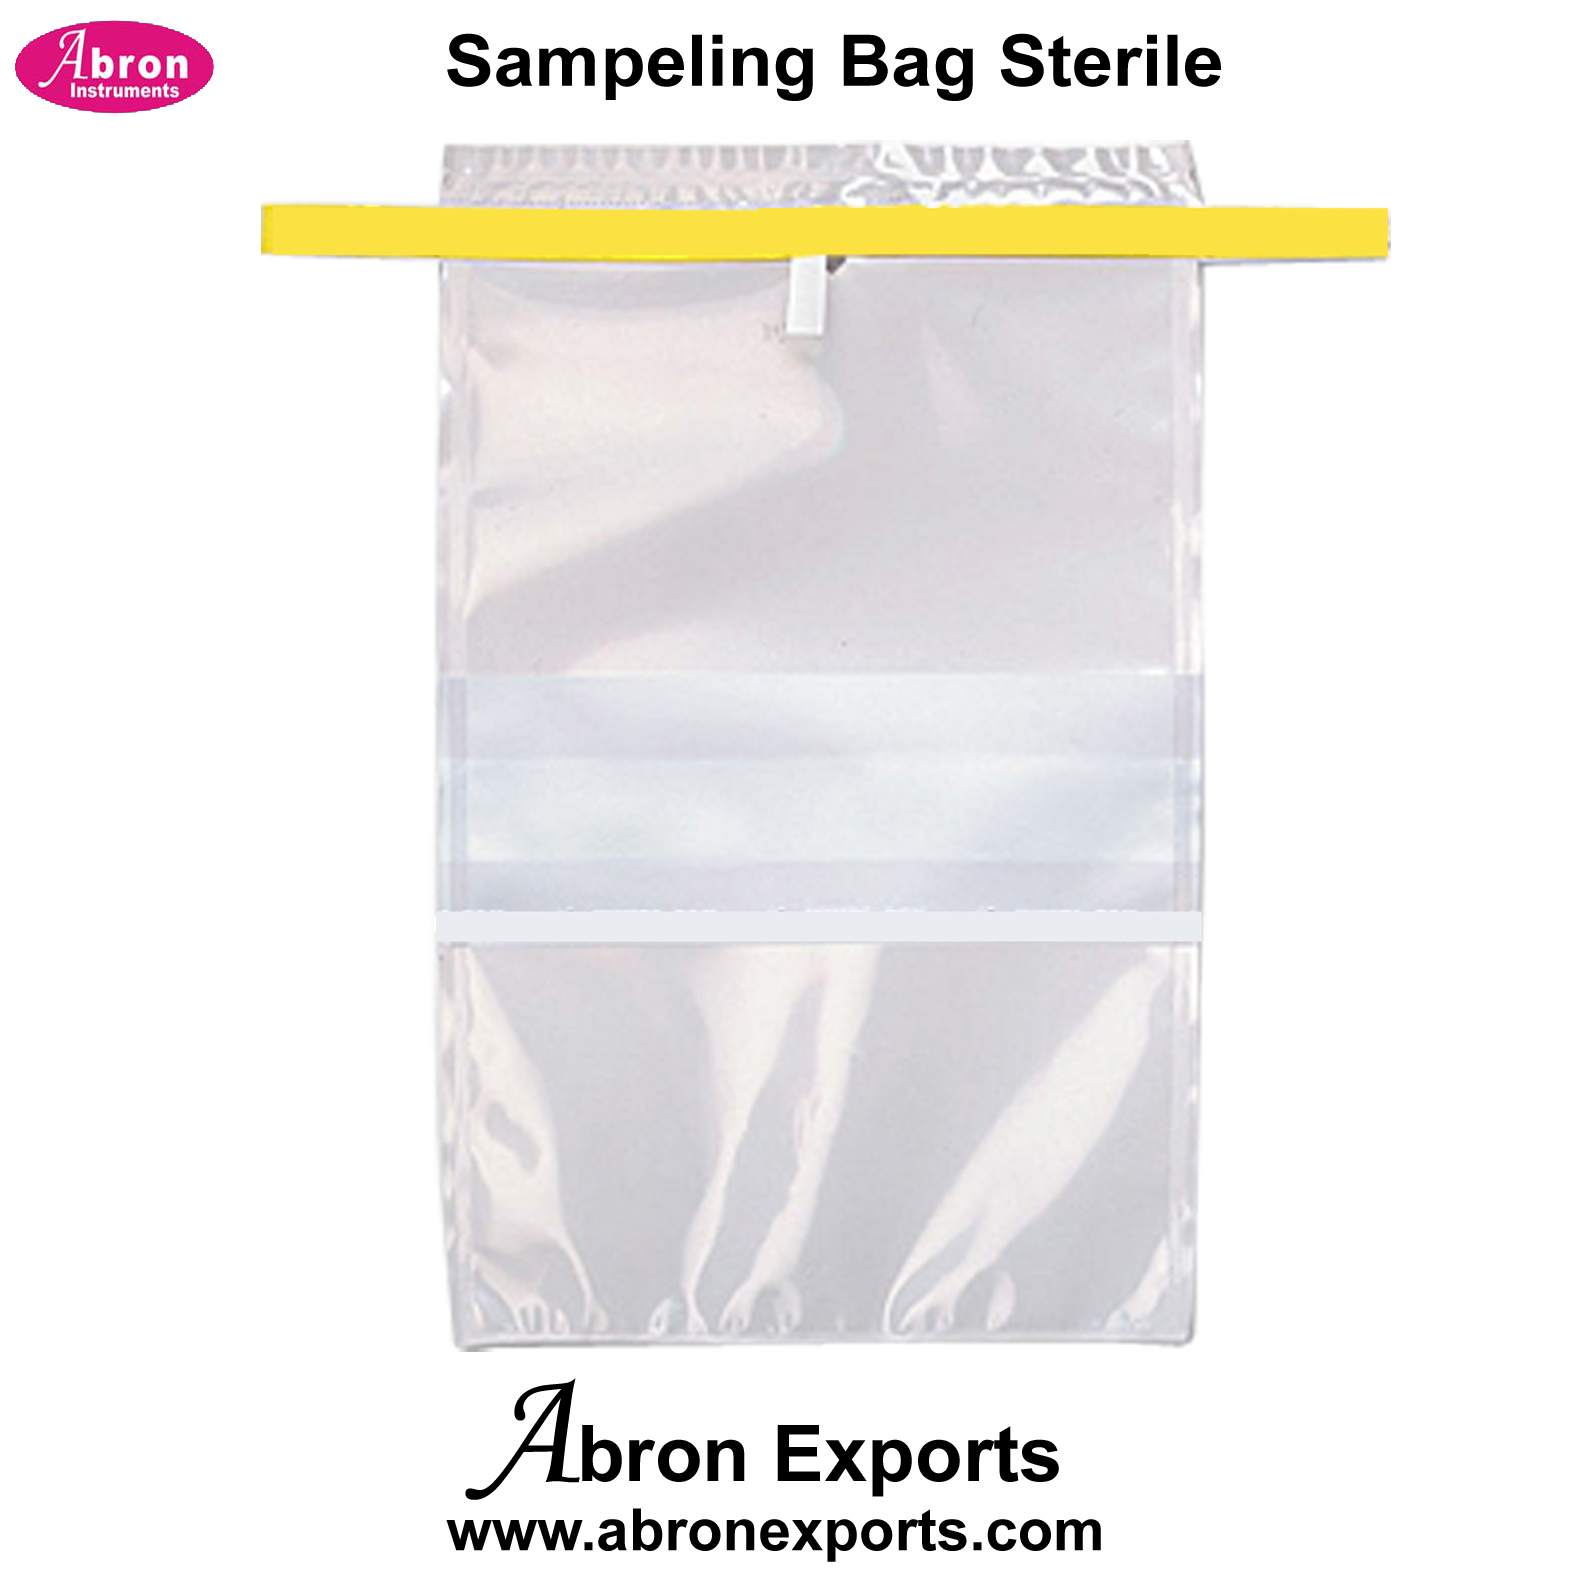 Hospital Disposable Bags sterile for sample food industry with white pack strip sealing 1000 pc Abron ABM-2425BS